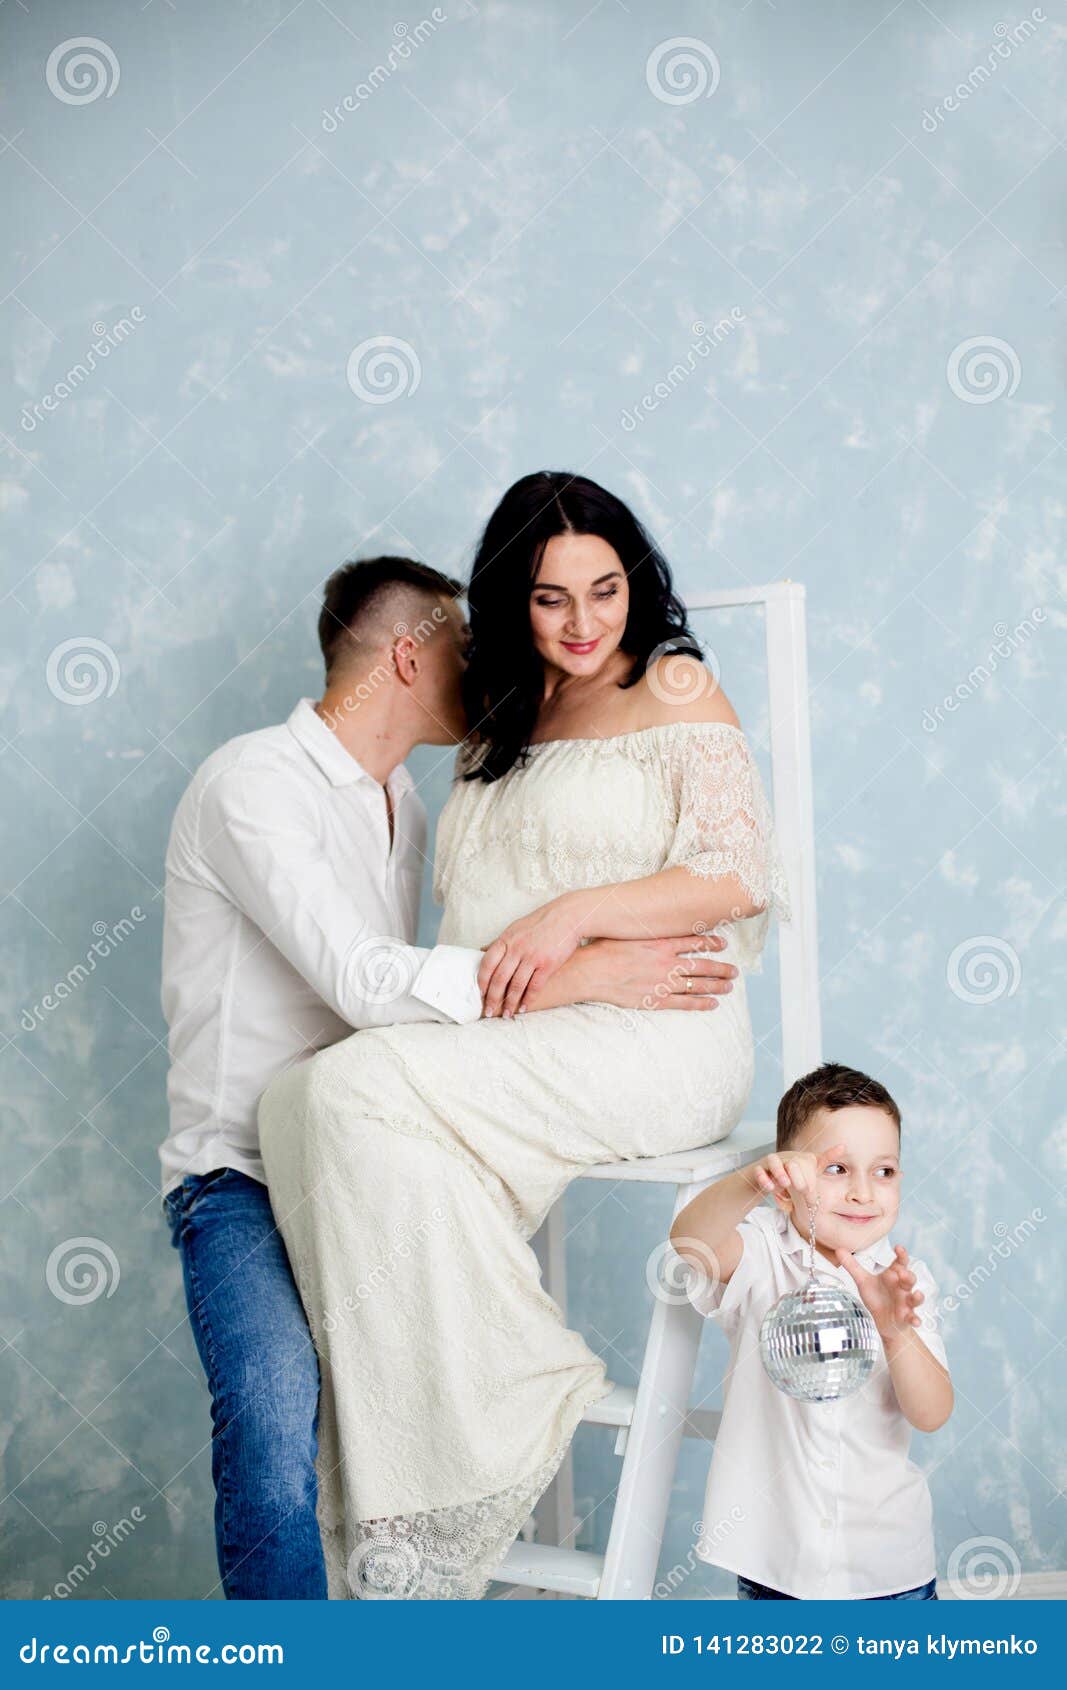 Love lives together. Loving caring husband going to kiss wife in cheek have  good relationships pose for family portrait against brown background. Old  couple pose indoor. Happy romantic mature woman Stock Photo |